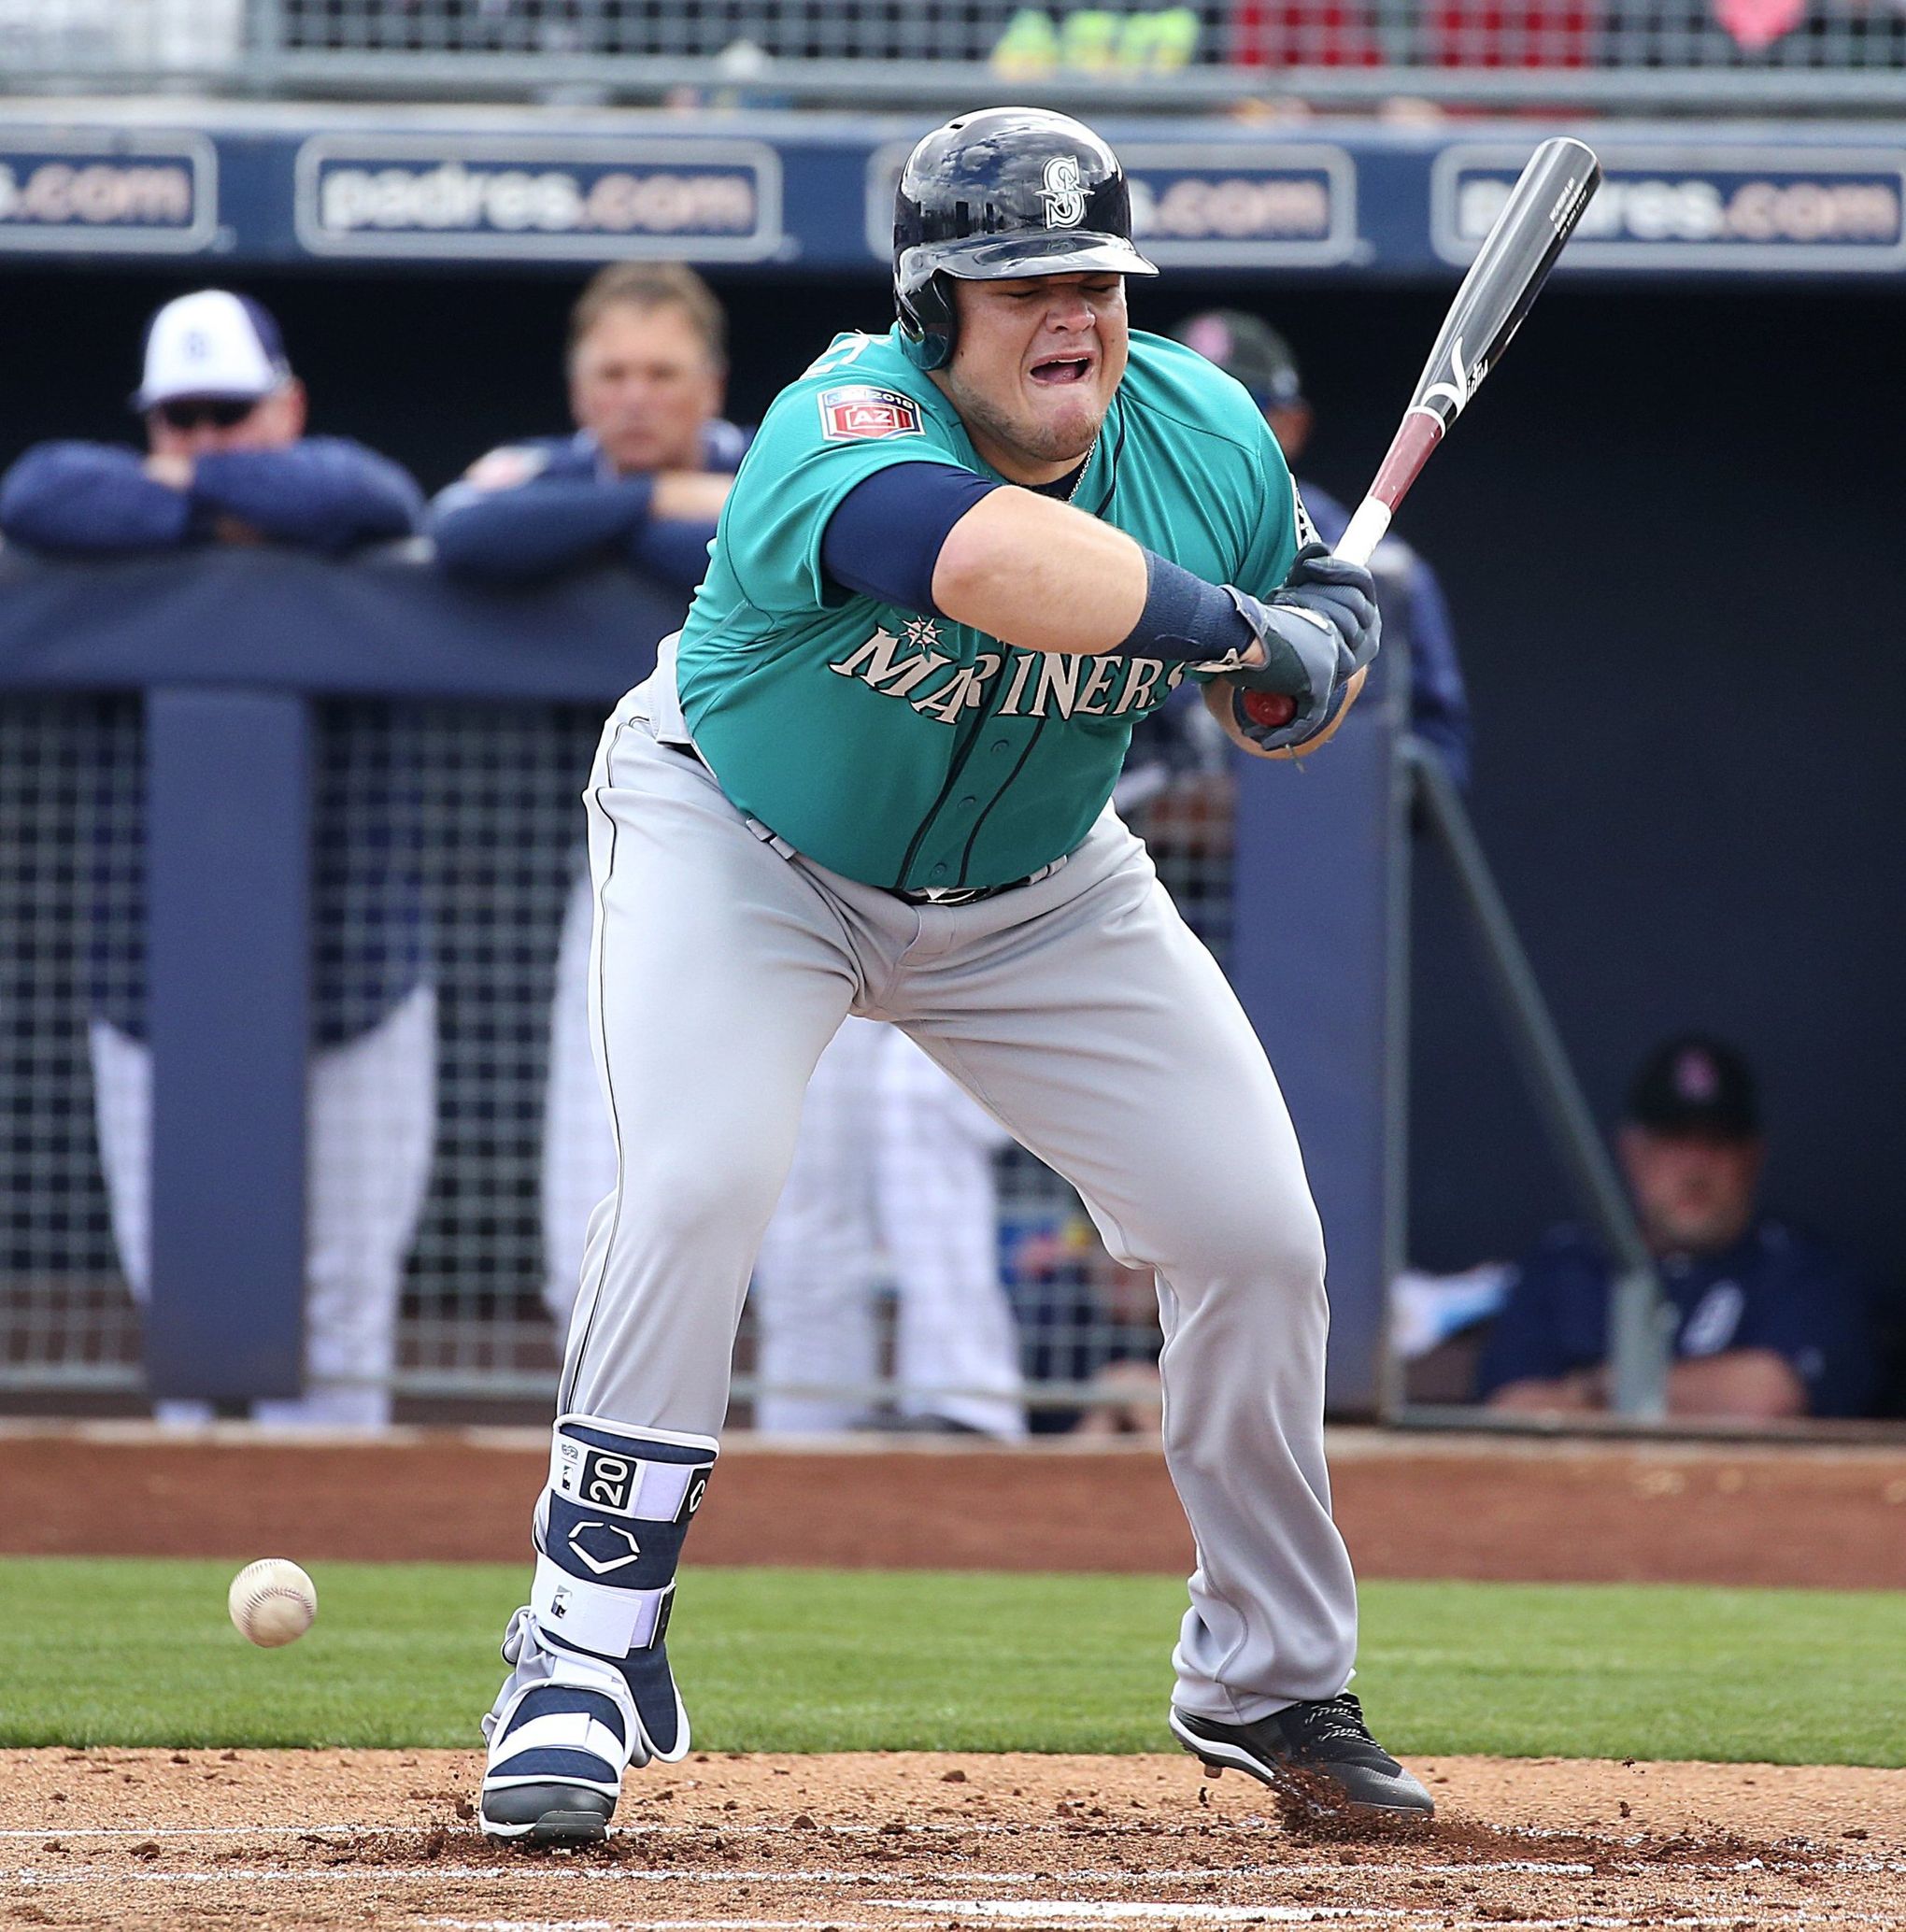 Mariners morning notes: Mitch Haniger's hand is hurting, Daniel